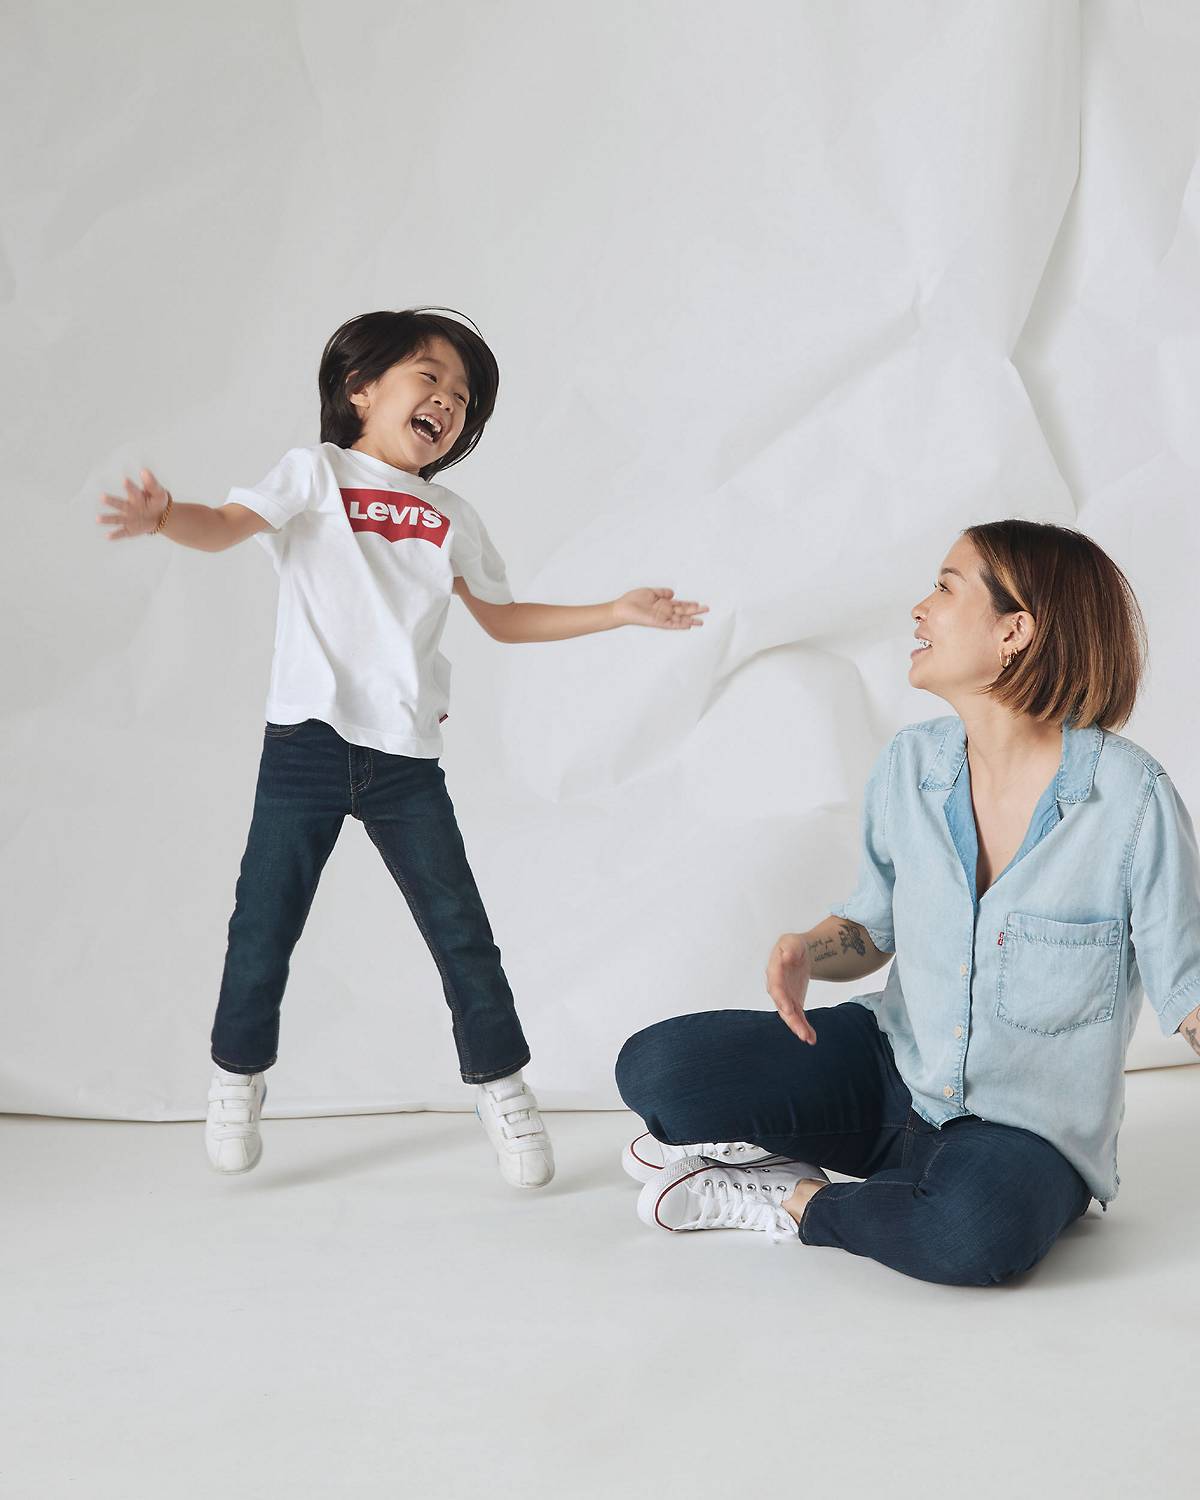 Rotating imagery of kid jumping next their mom in assorted Levi's styles